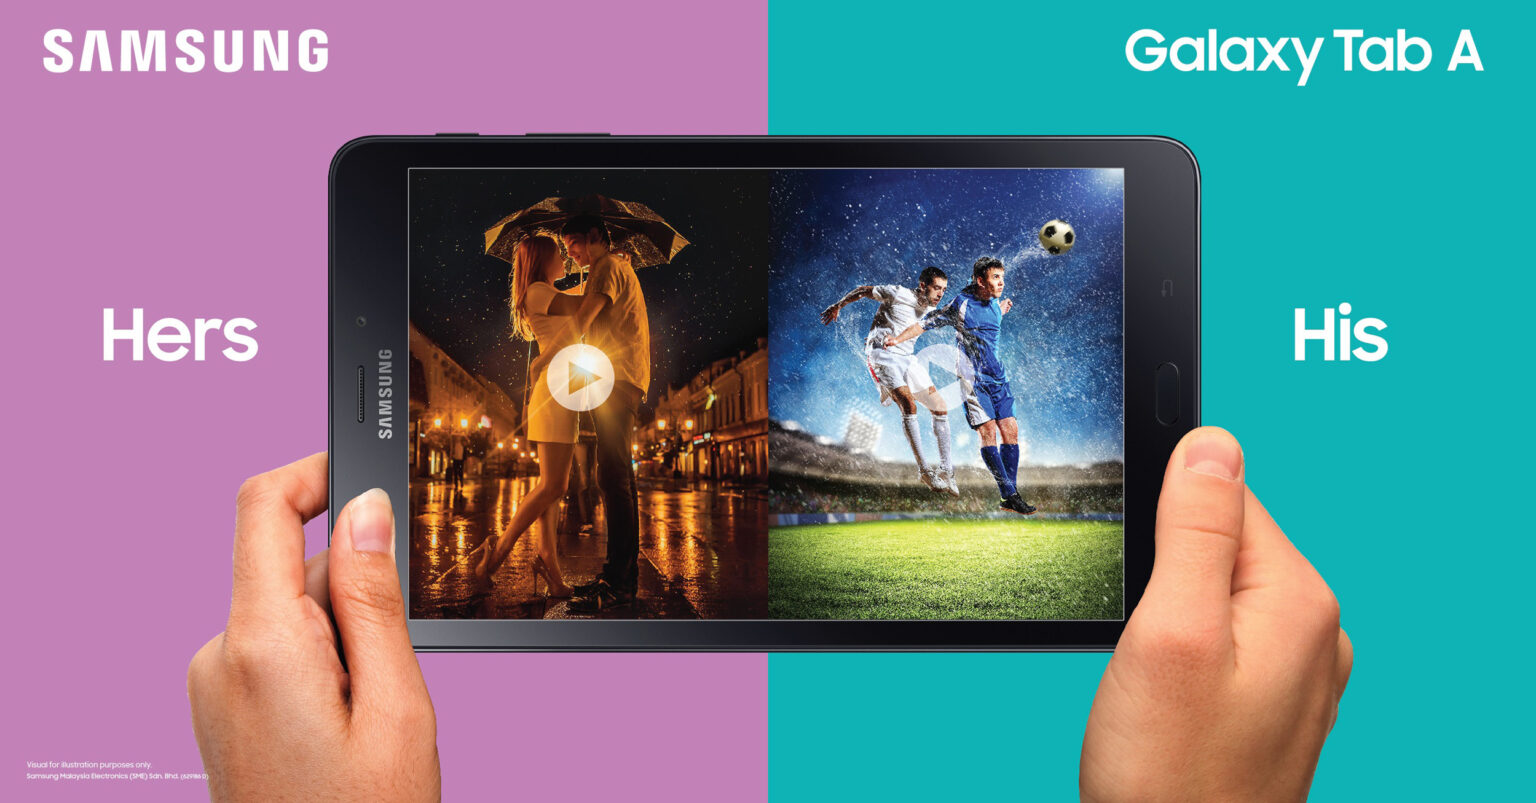 Enjoy Endless Entertainment Anywhere With Samsung’s New Galaxy Tab A